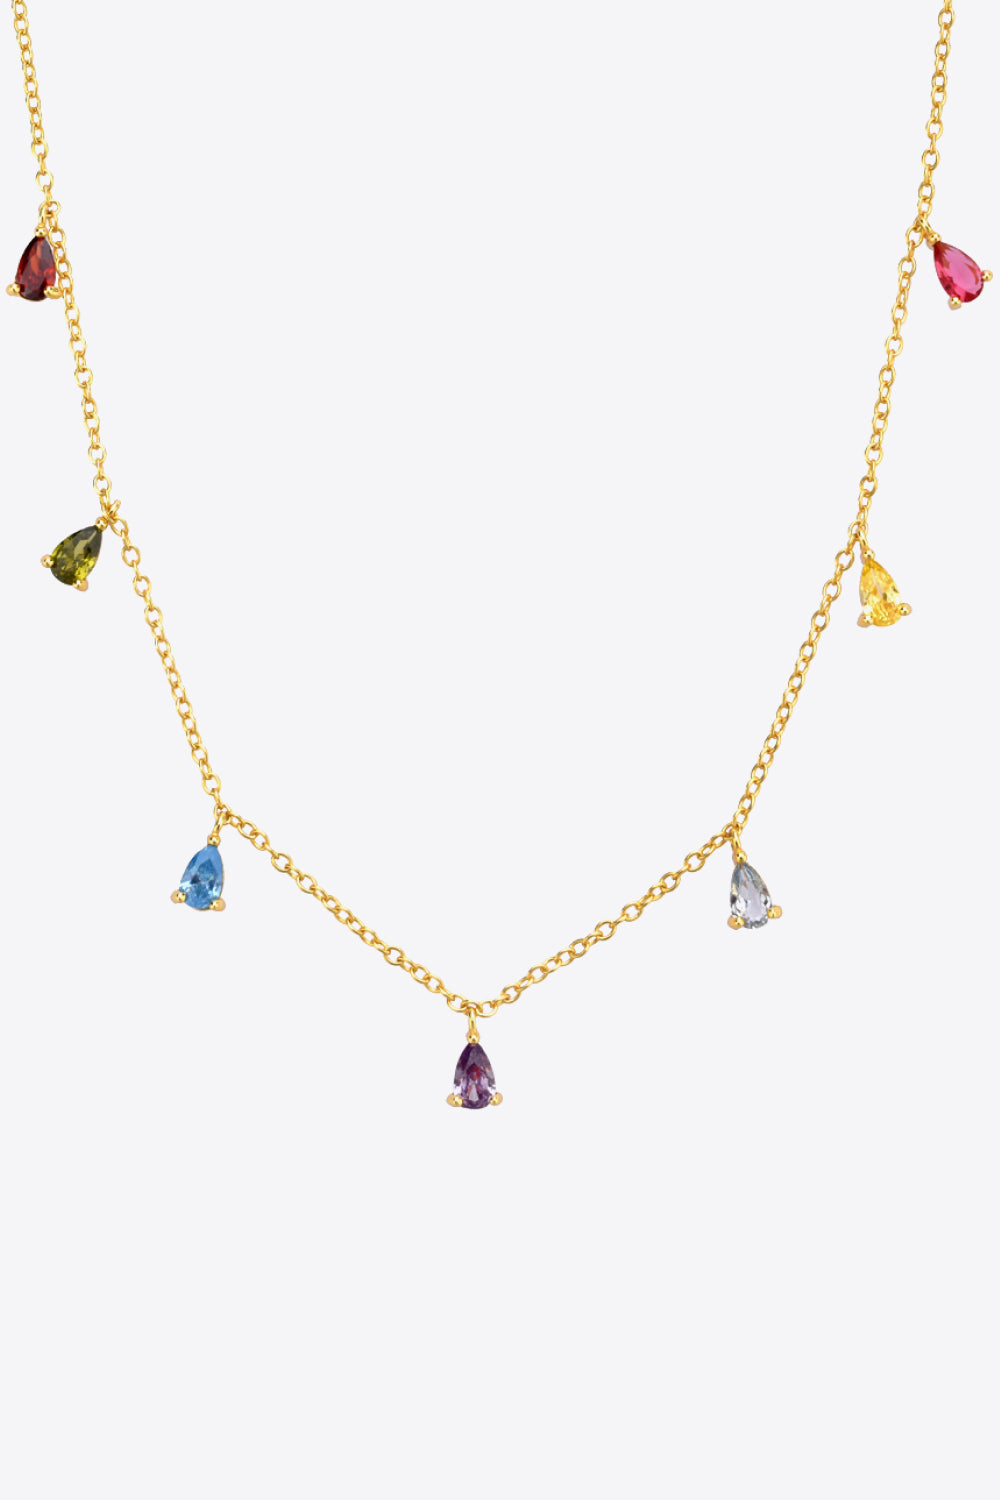 Multi-Stone Zircon Necklace in Sterling Silver or Gold Plated